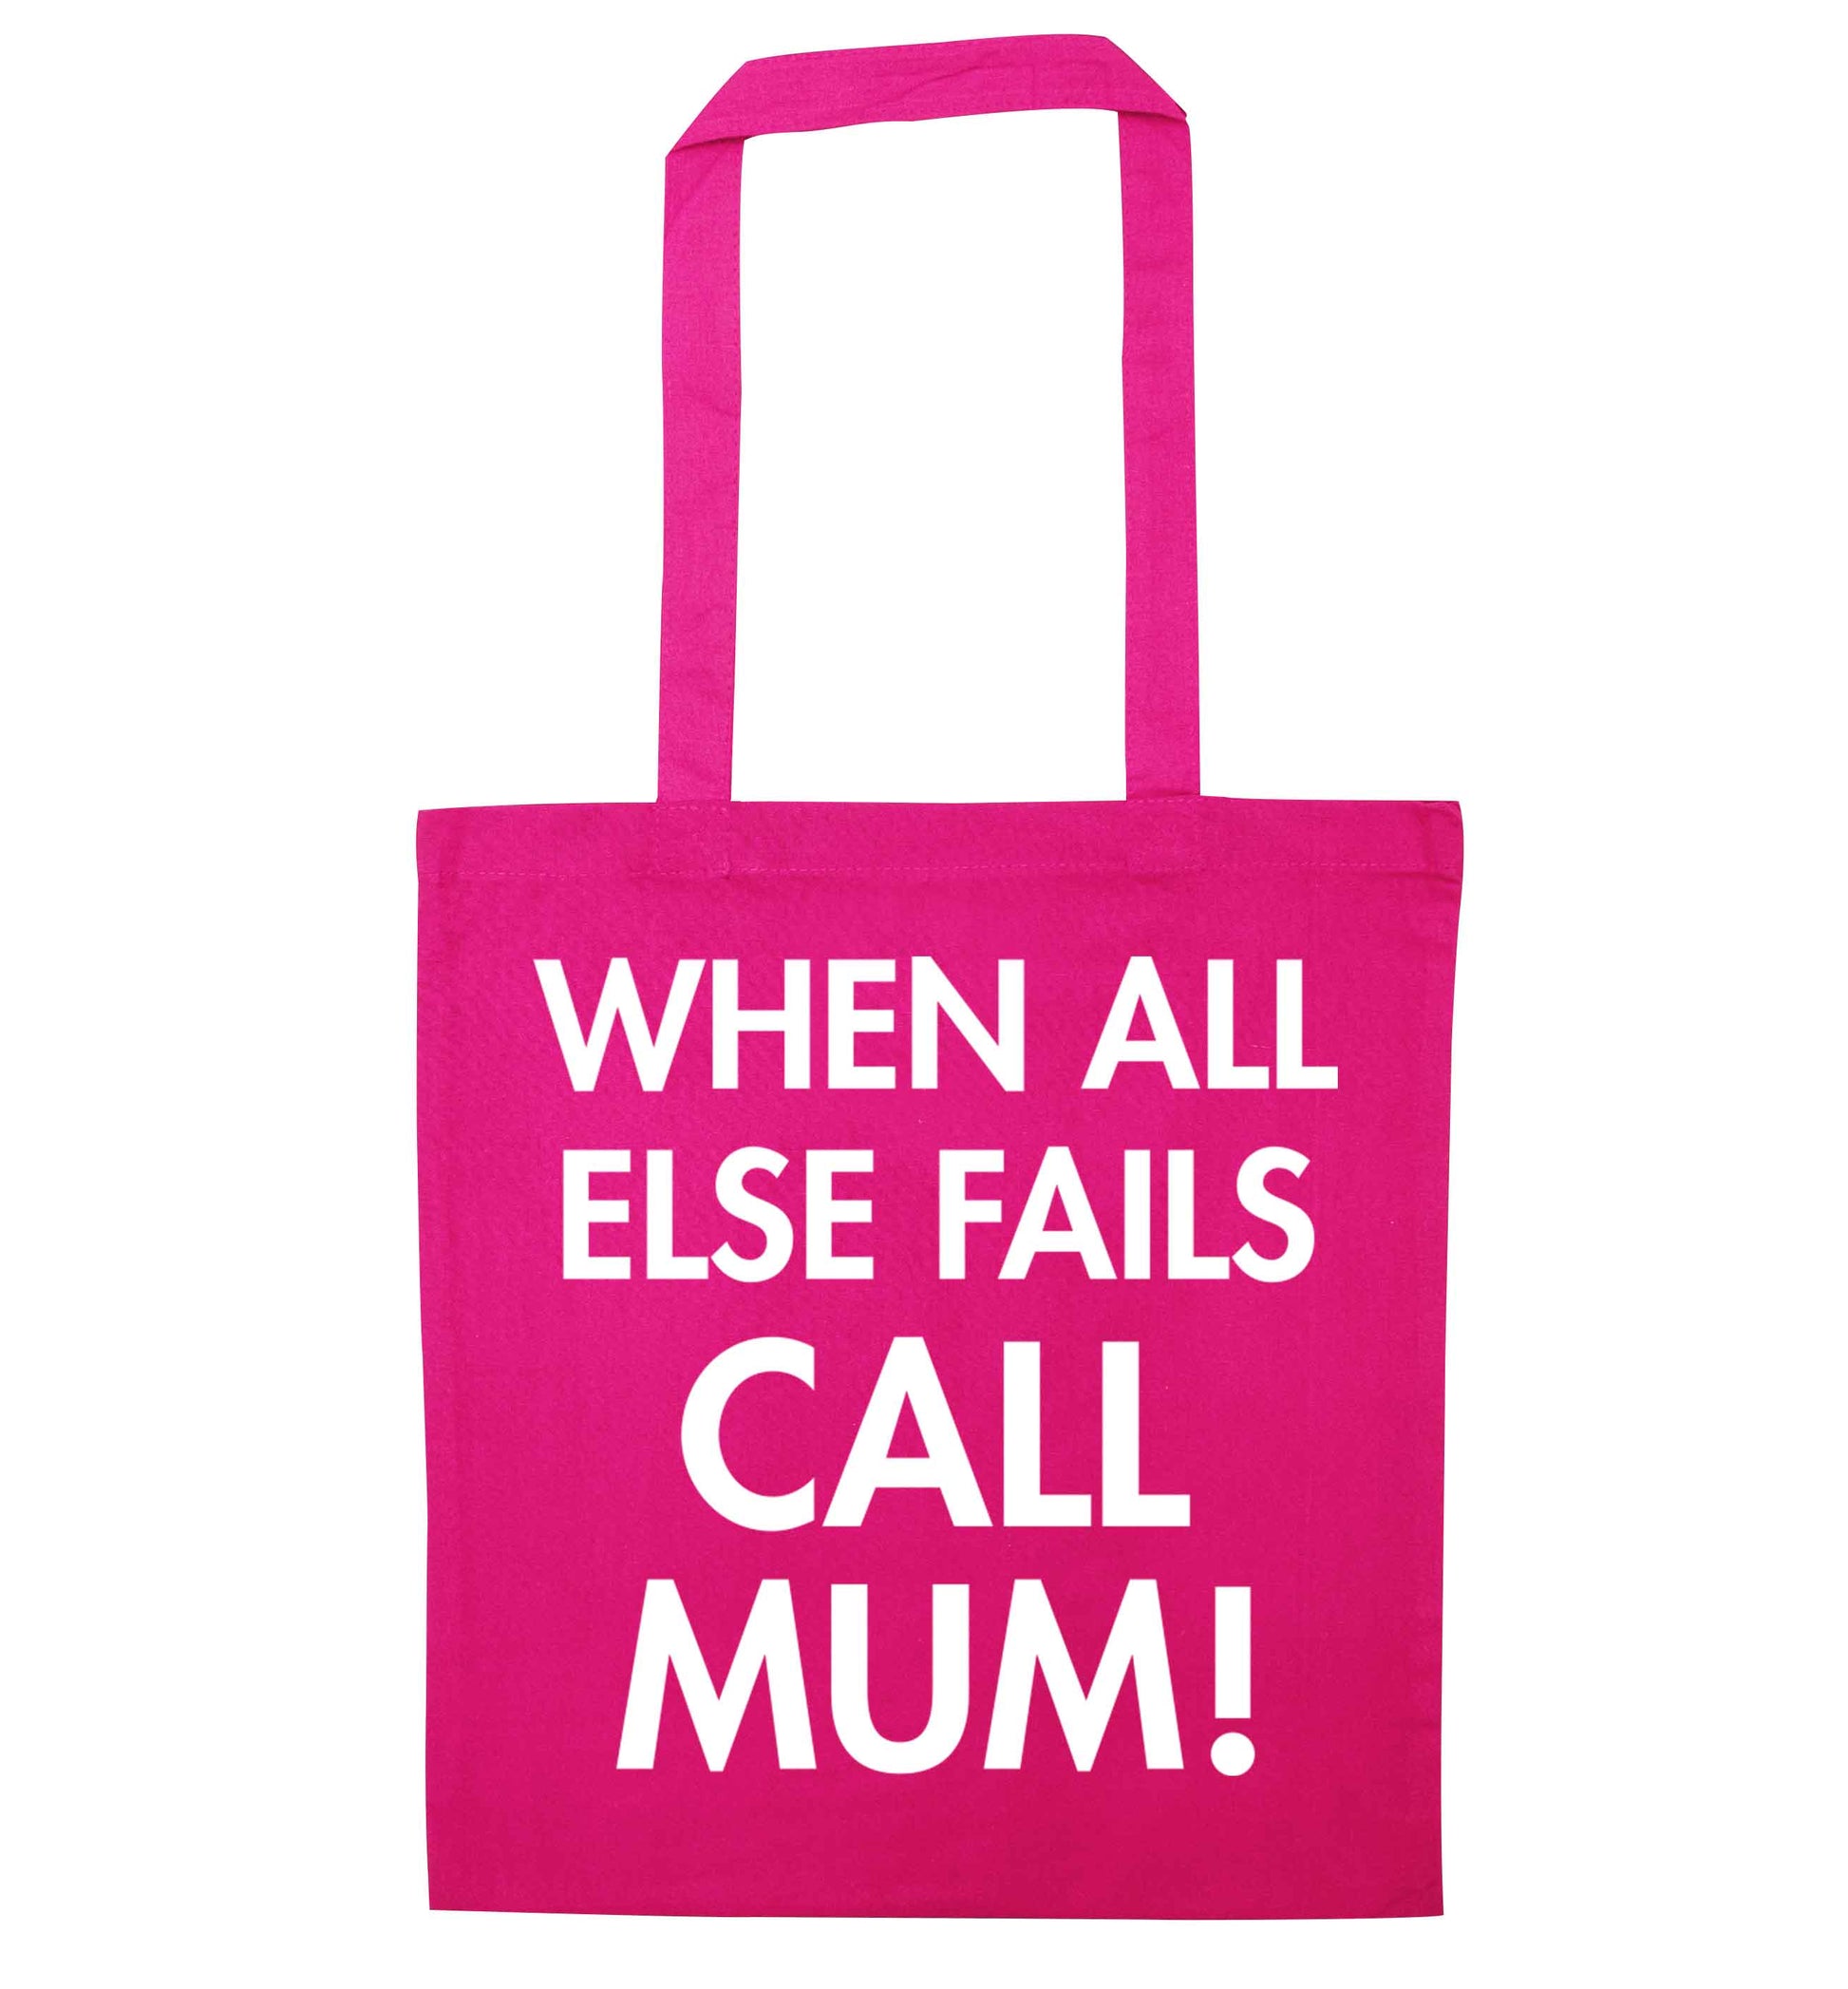 When all else fails call mum! pink tote bag